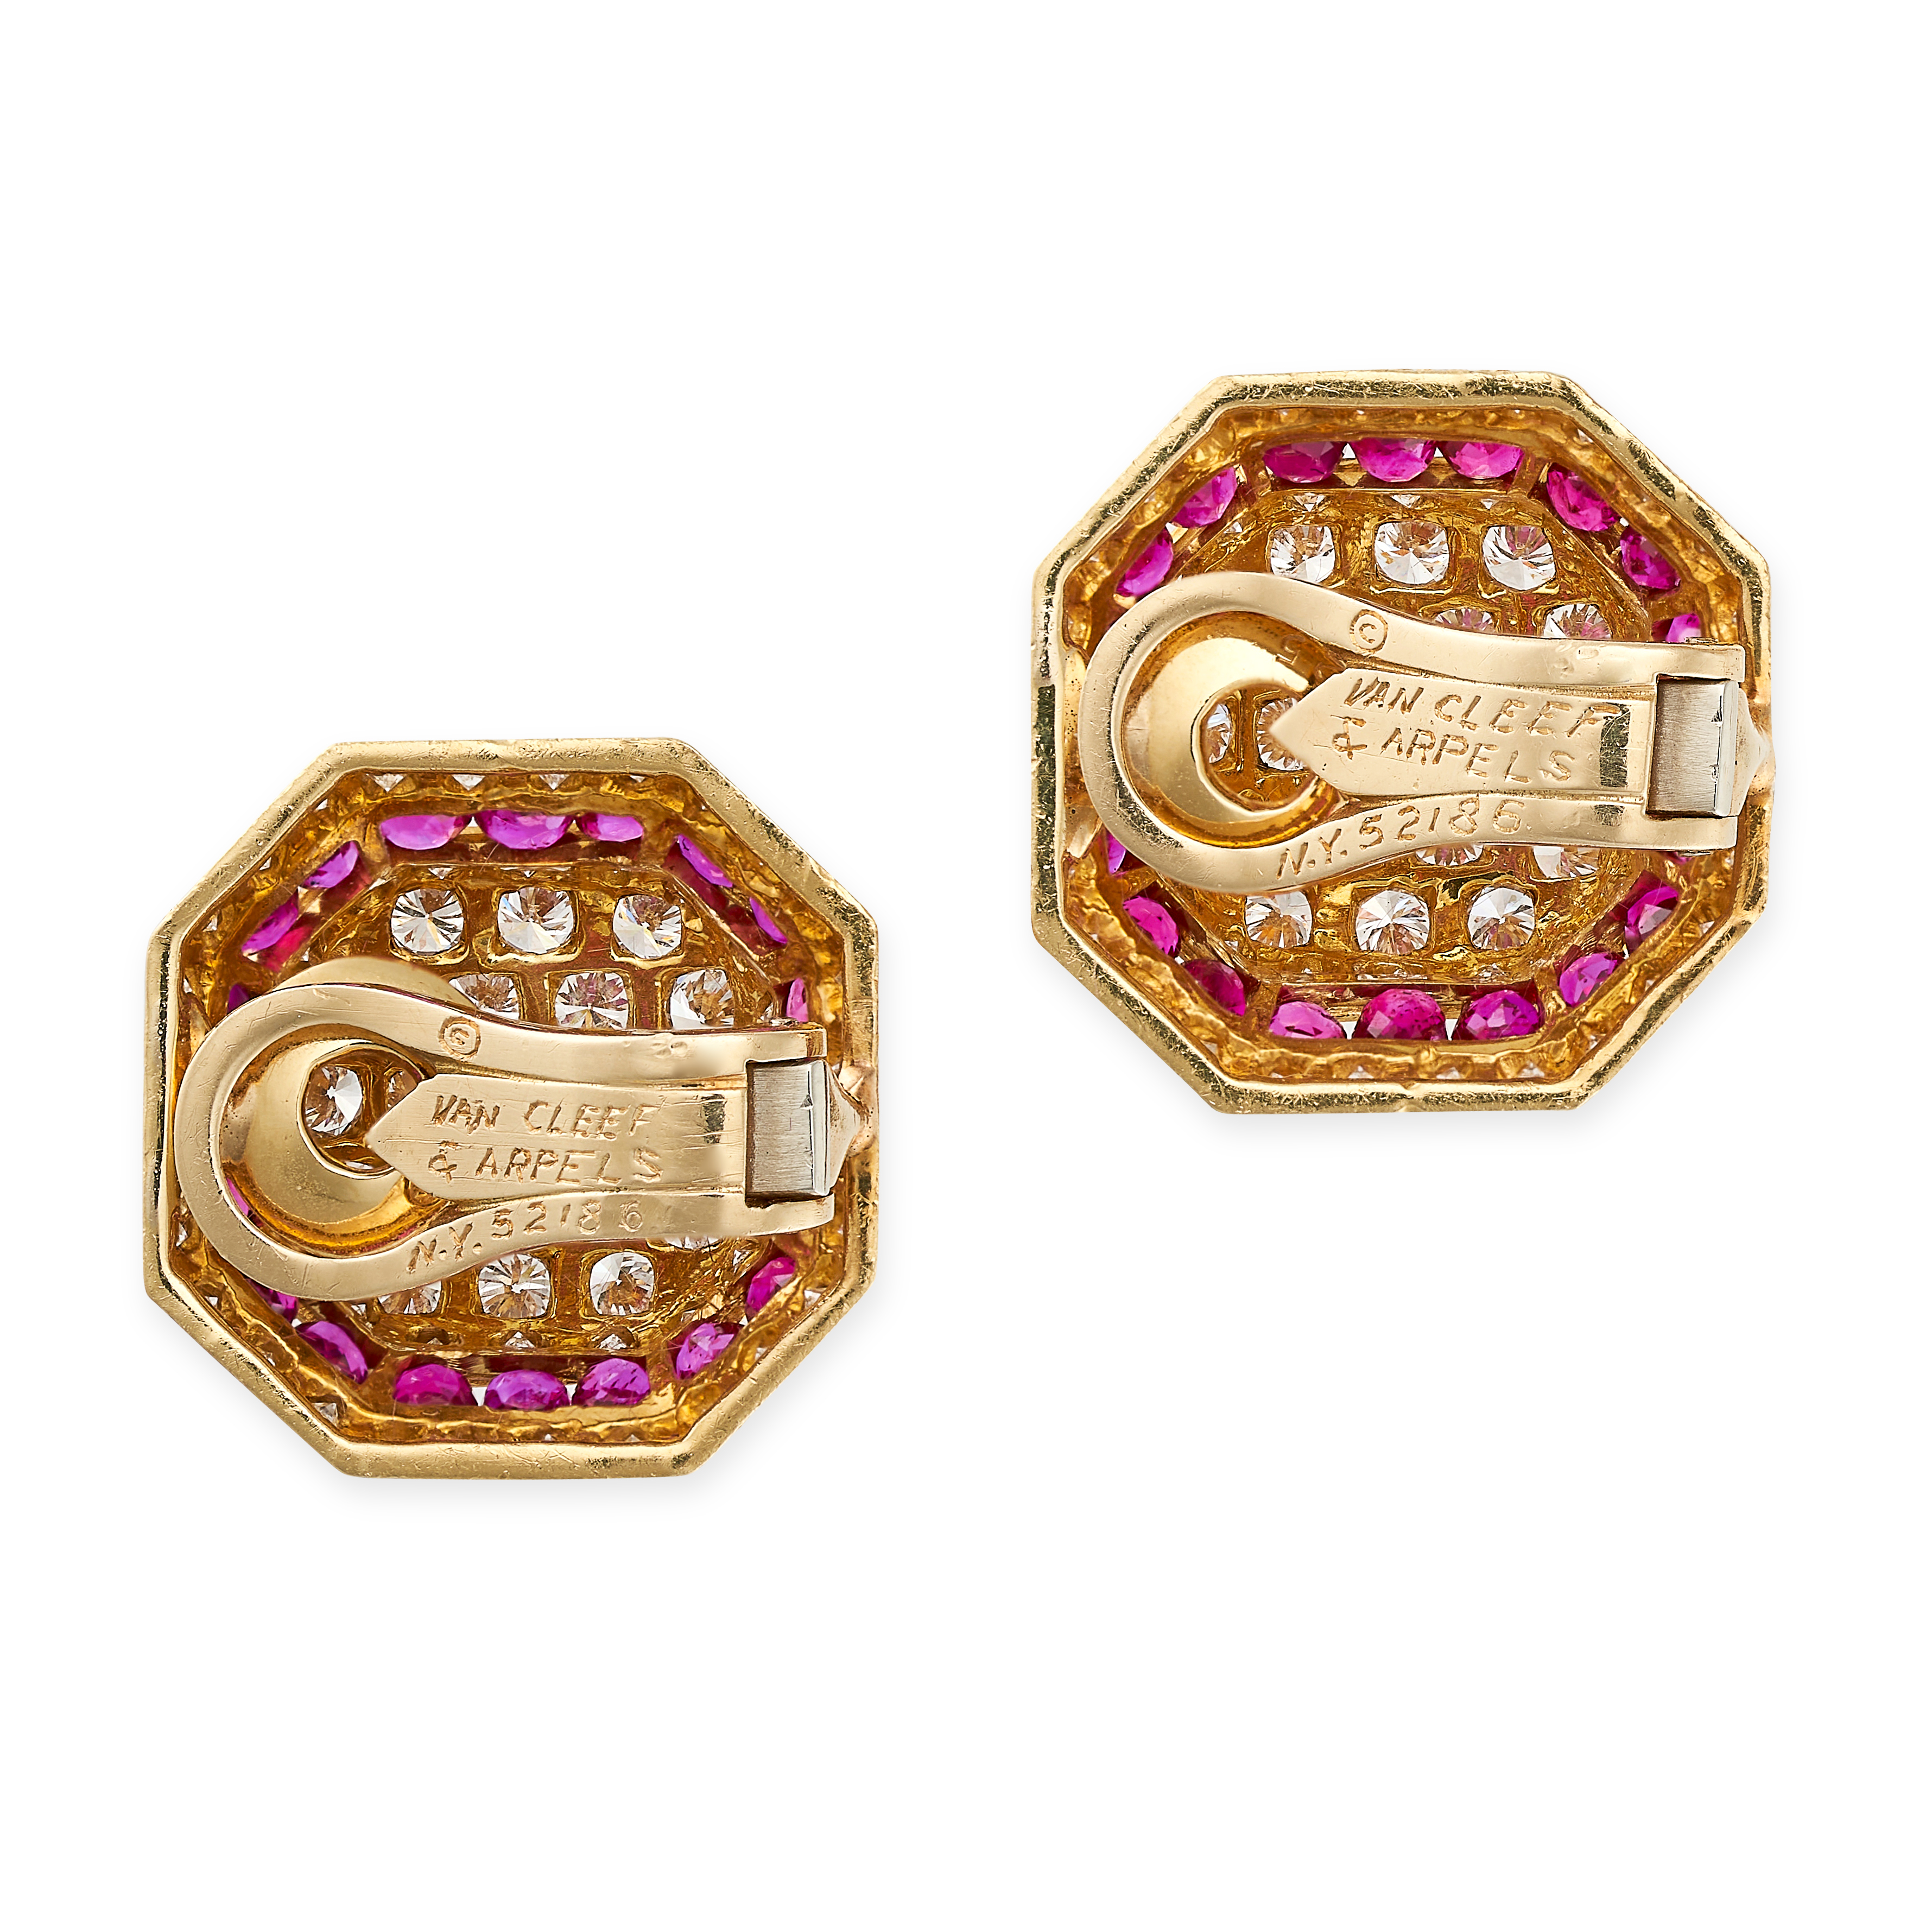 VAN CLEEF & ARPELS, A PAIR OF VINTAGE RUBY AND DIAMOND EARRINGS in 18ct yellow gold, each designed - Image 2 of 2